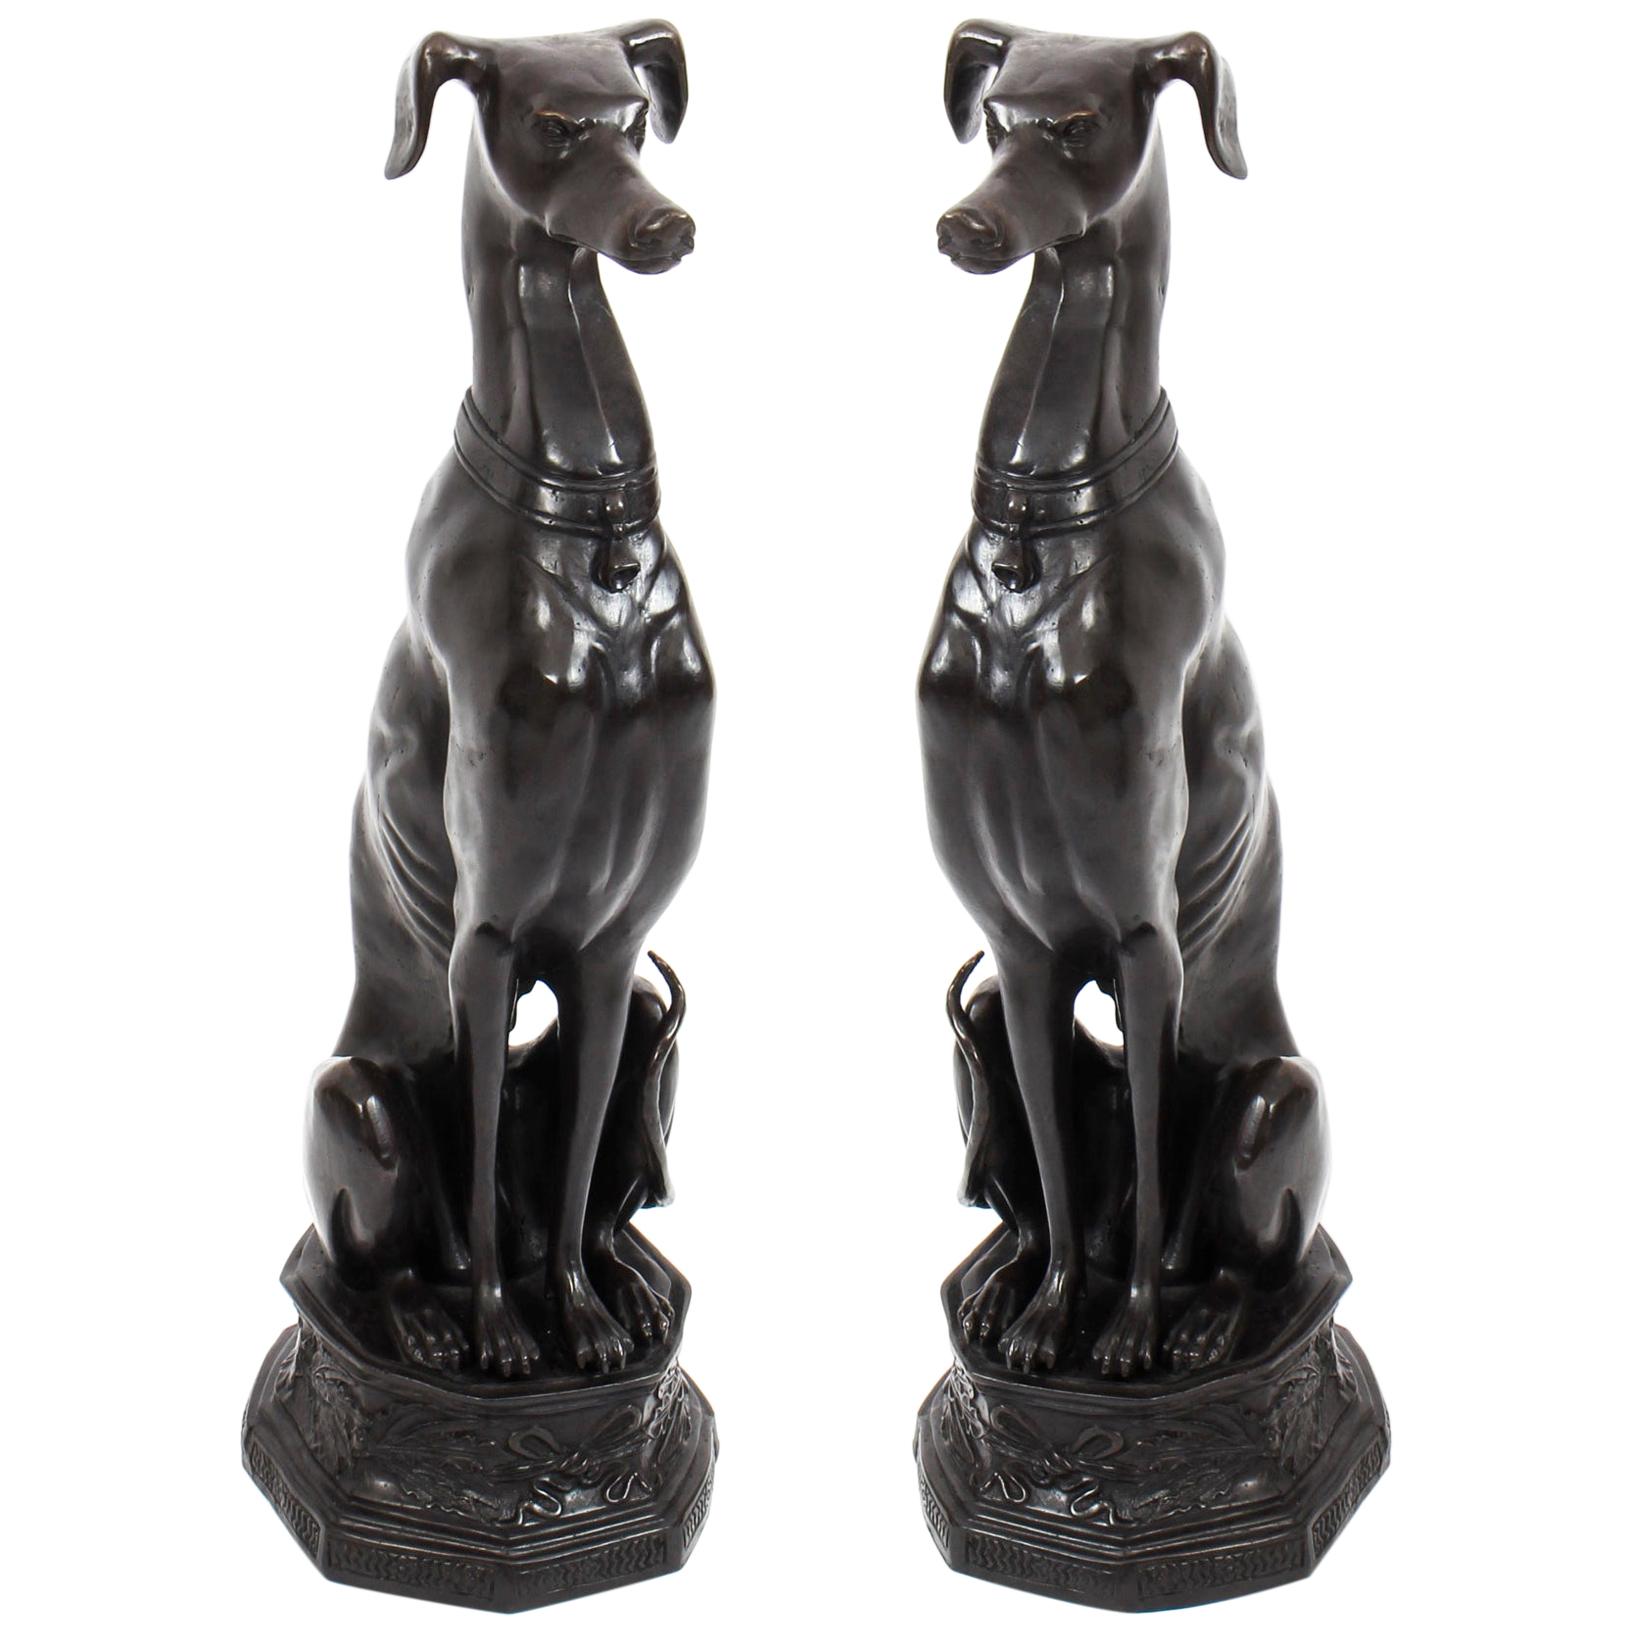 Vintage Pair of Art Deco Revival Bronze Seated Dogs, 20th Century